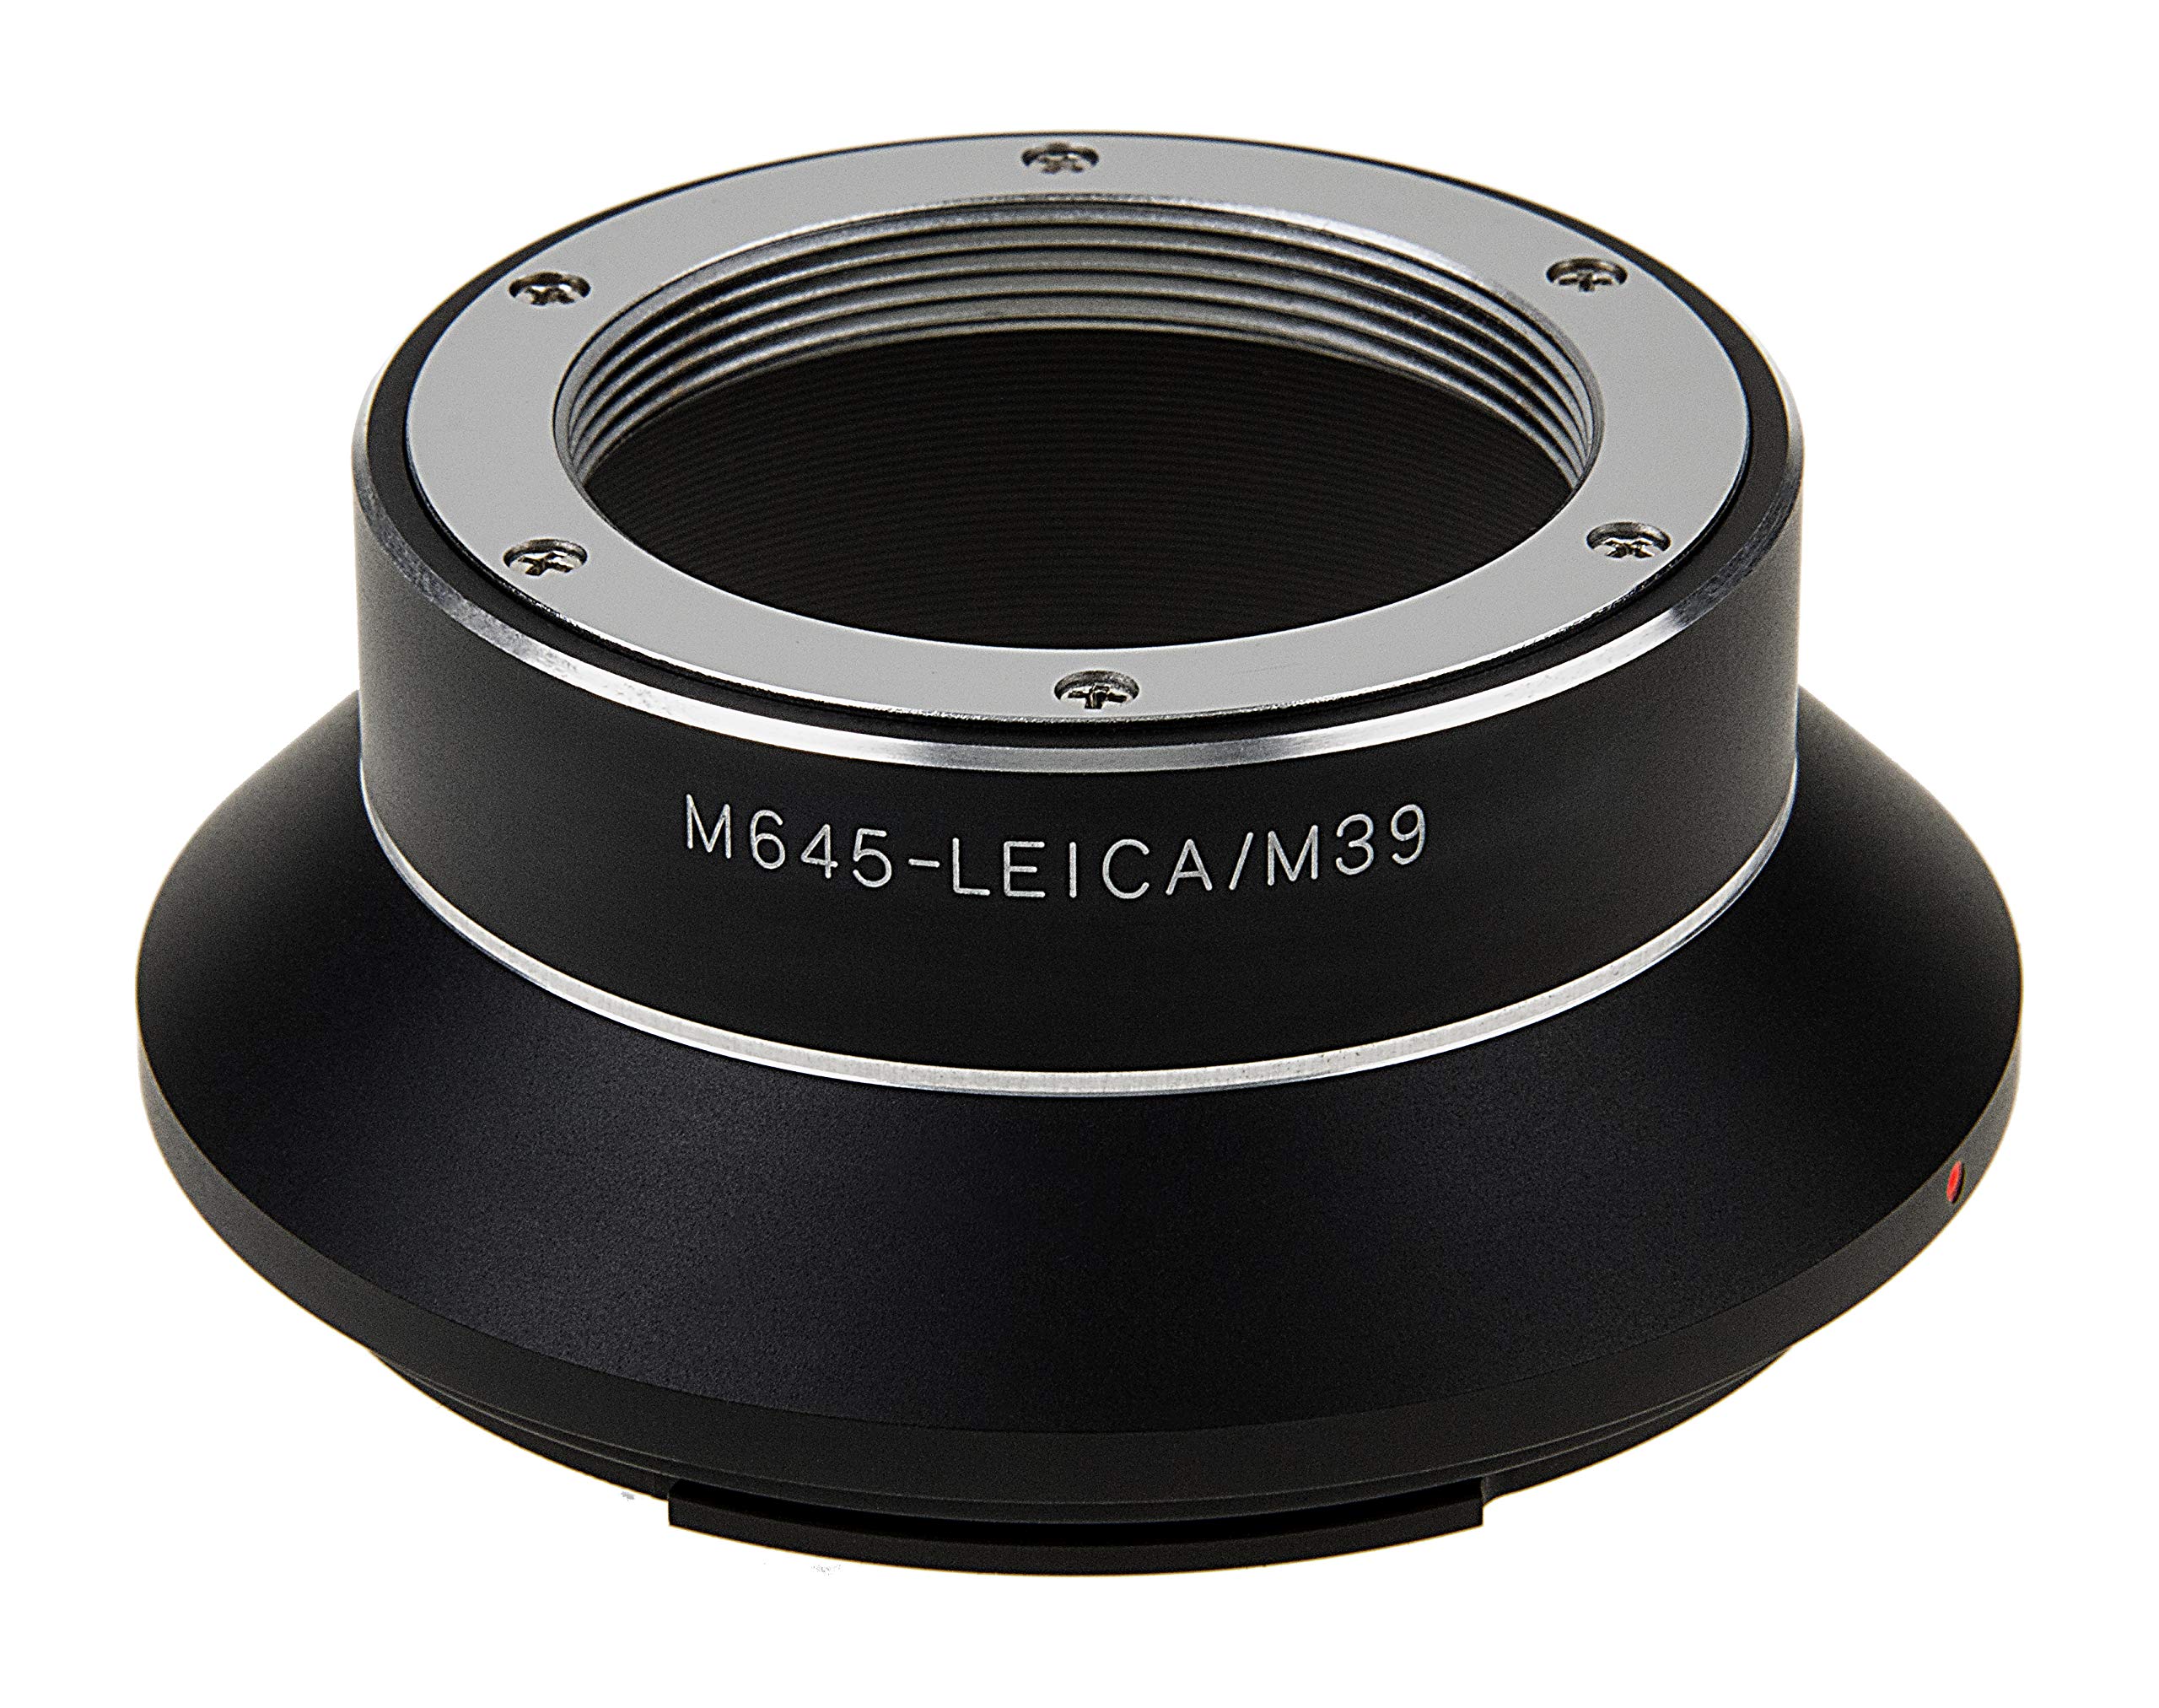 Fotodiox Pro Lens Mount Adapter Compatible with L39 Leica Visoflex Lenses on Mamiya 645 Cameras